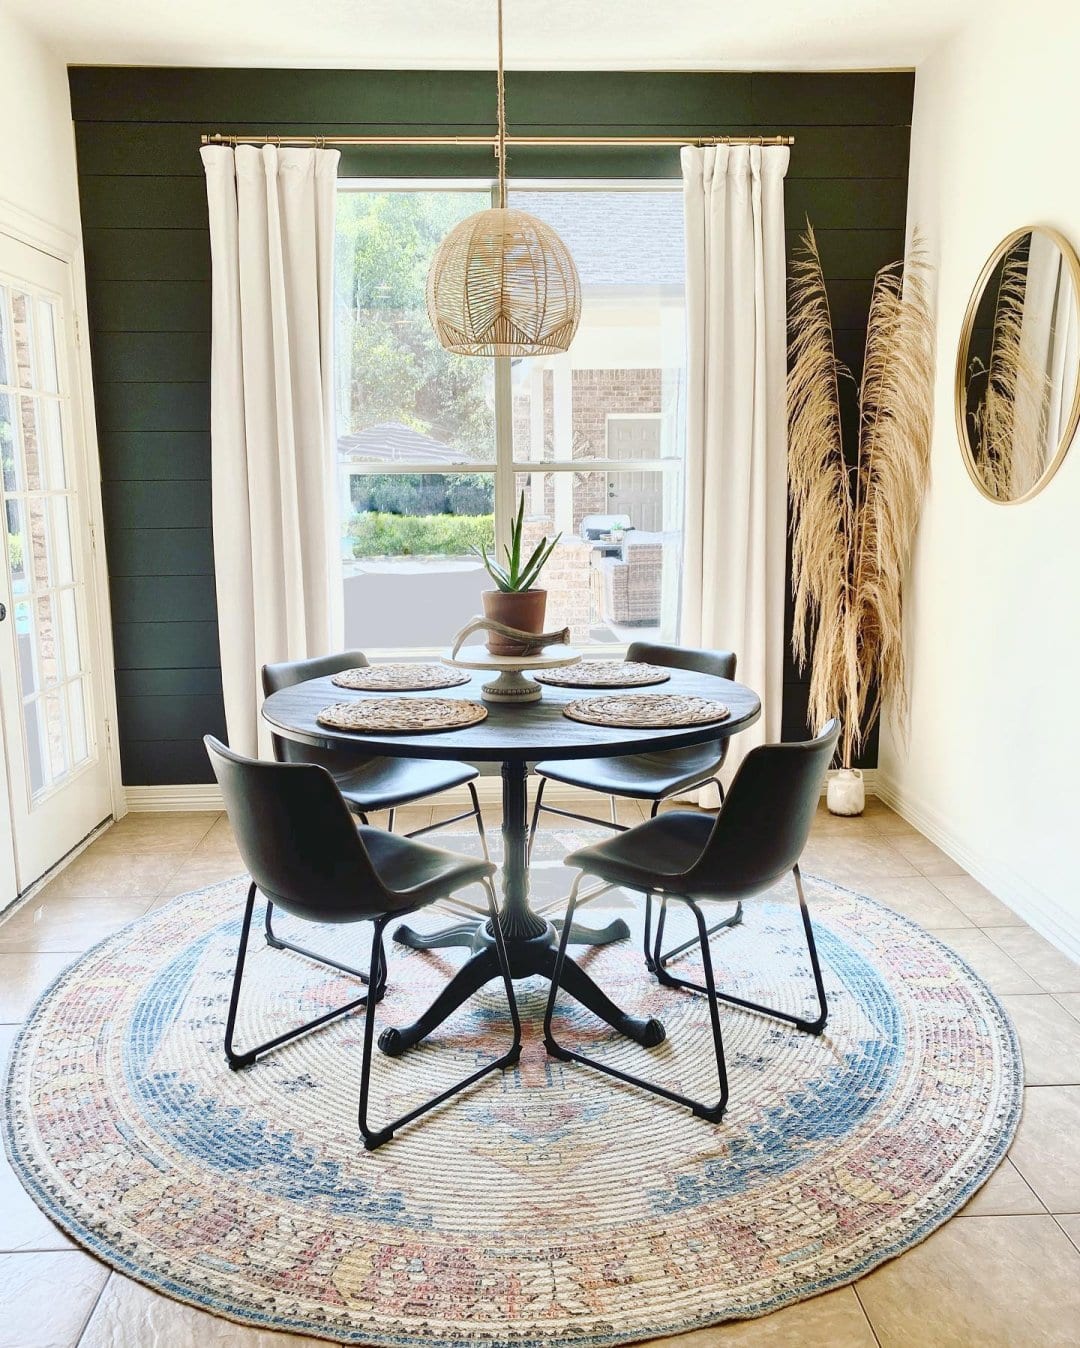 How To Decorate A Round Dining Table, Round Table Settings Ideas